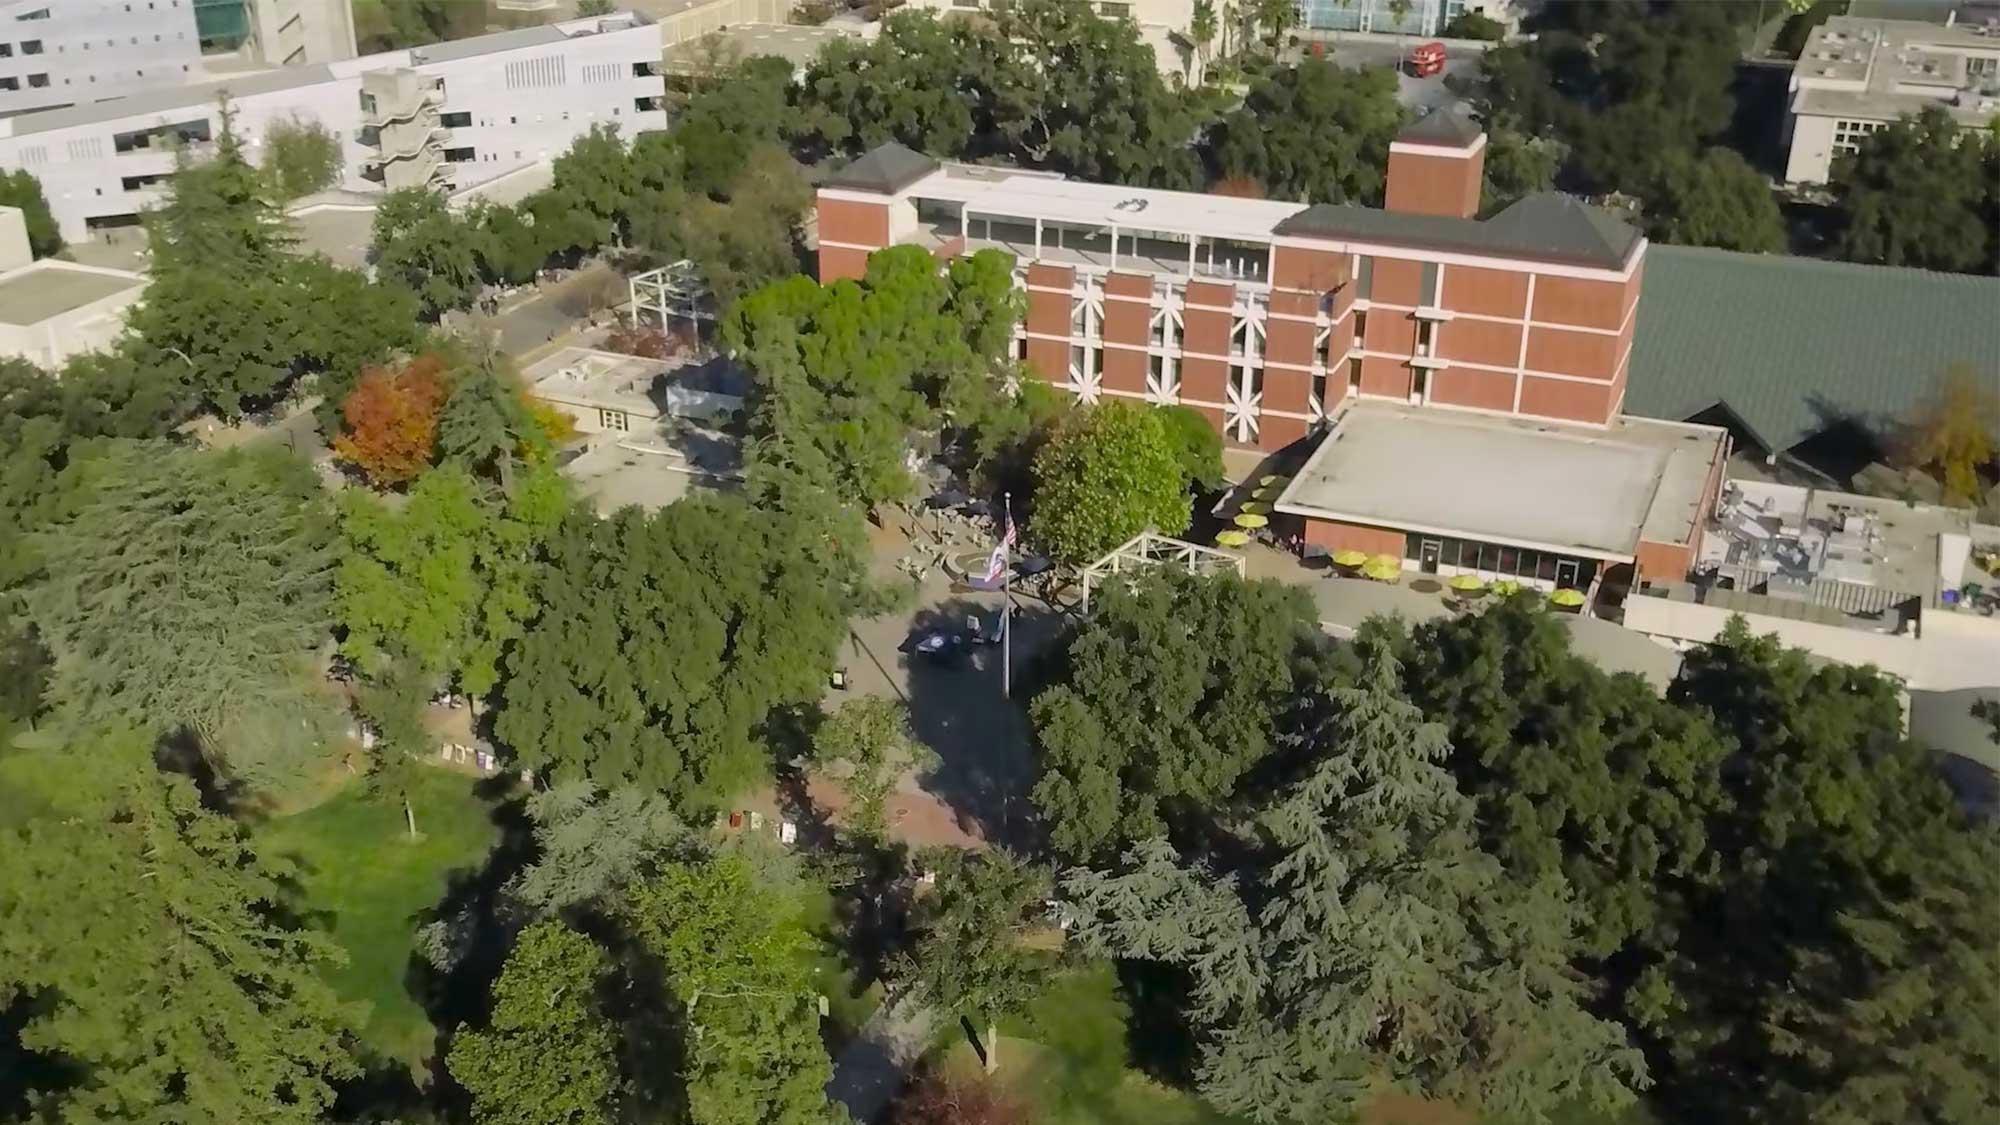 aerial view of the UC Davis campus showing some buildings surrounded by trees